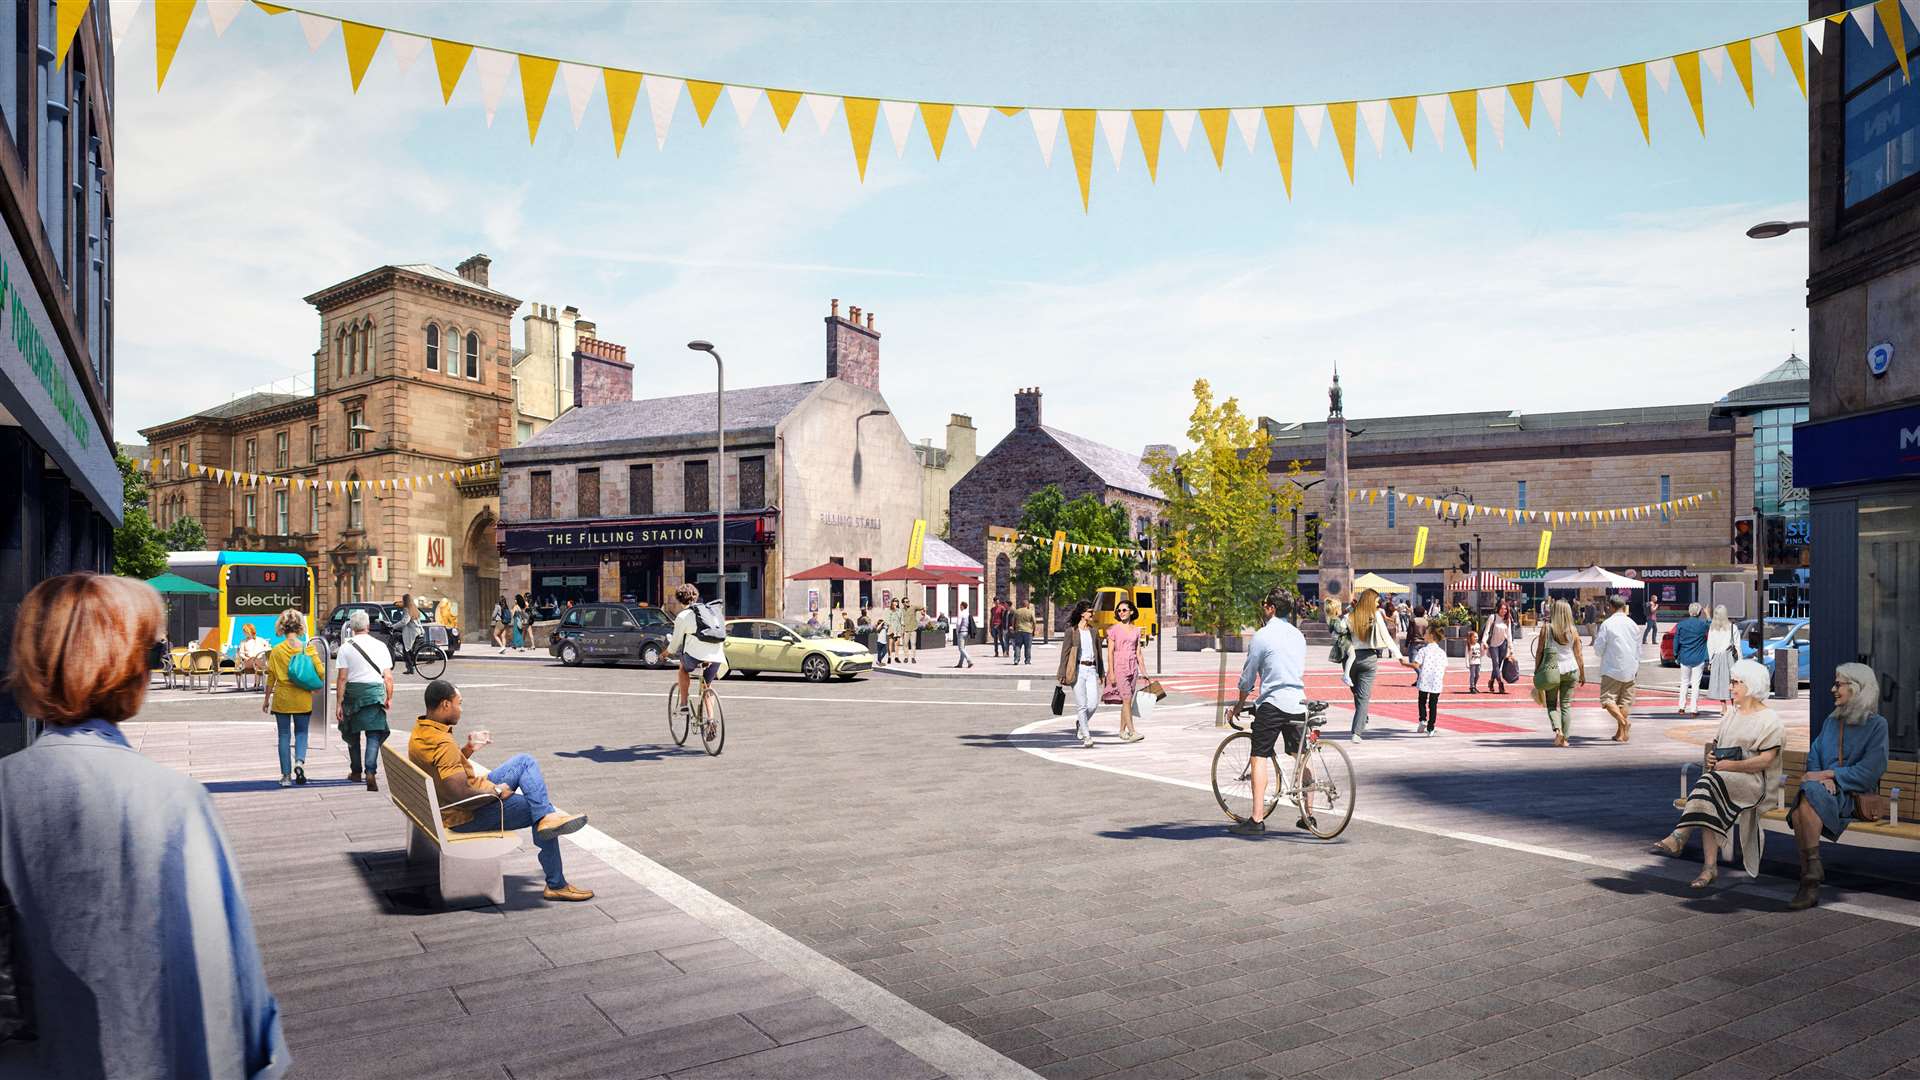 An artist's impression of part of the planned Academy Street revamp, featuring The Filling Station.